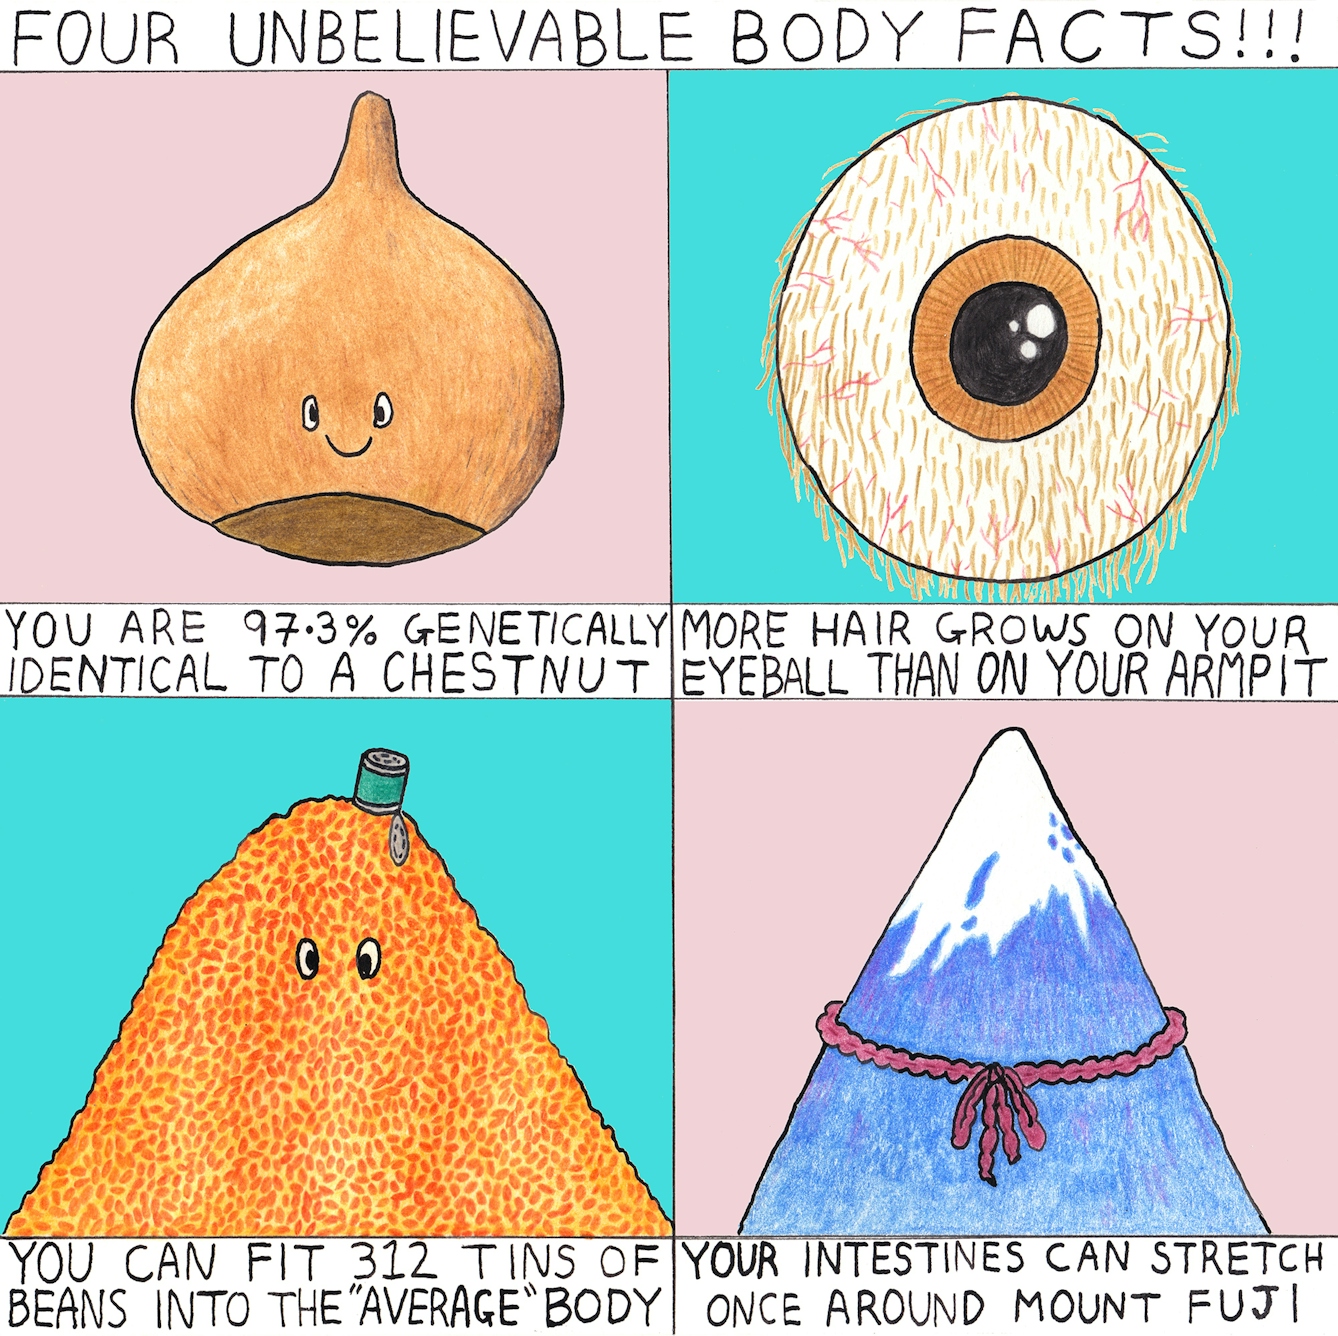 Four unbelievable body facts!!! You are 97.3% genetically idential to a  chestnut. More hair grows on your eyeball than your armpit. You can fit 312 tins of beans into the 'average' body. Your intestines can stretch once around Mount Fuji.